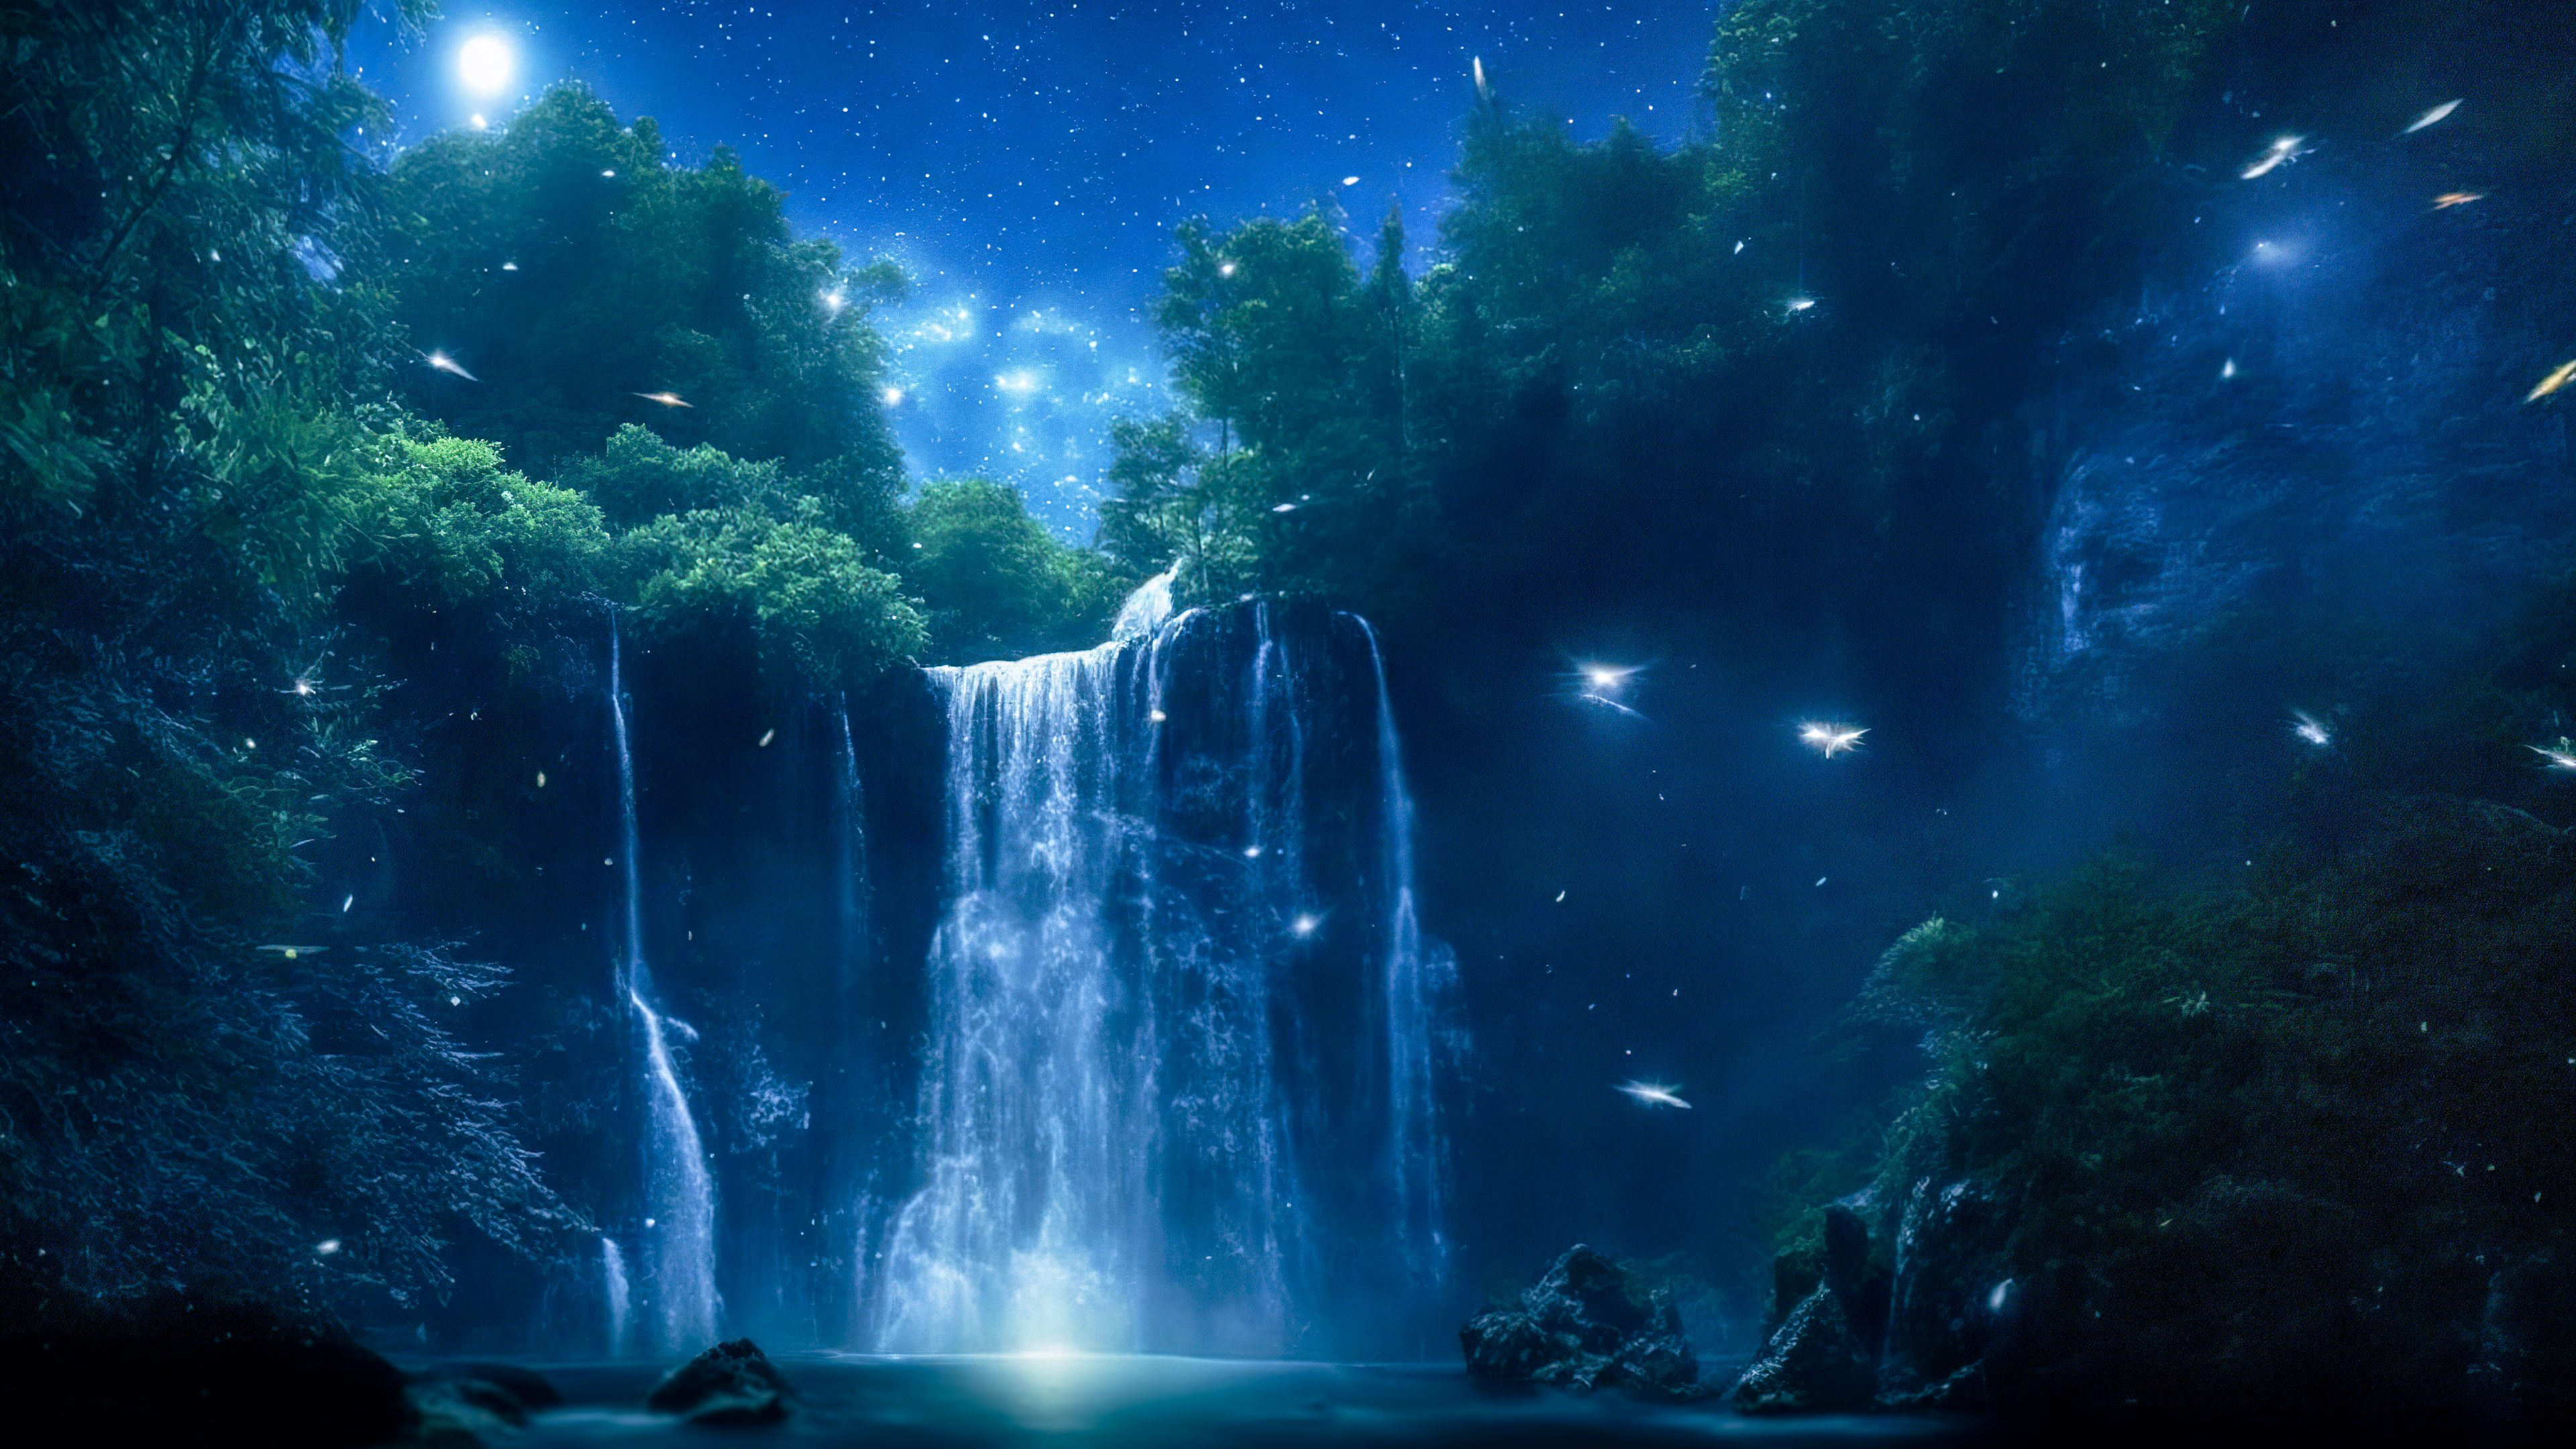 Get lost in the magic with our night sky background in 4K, showcasing a magical waterfall illuminated by moonlight, with fireflies dancing around its cascading waters.